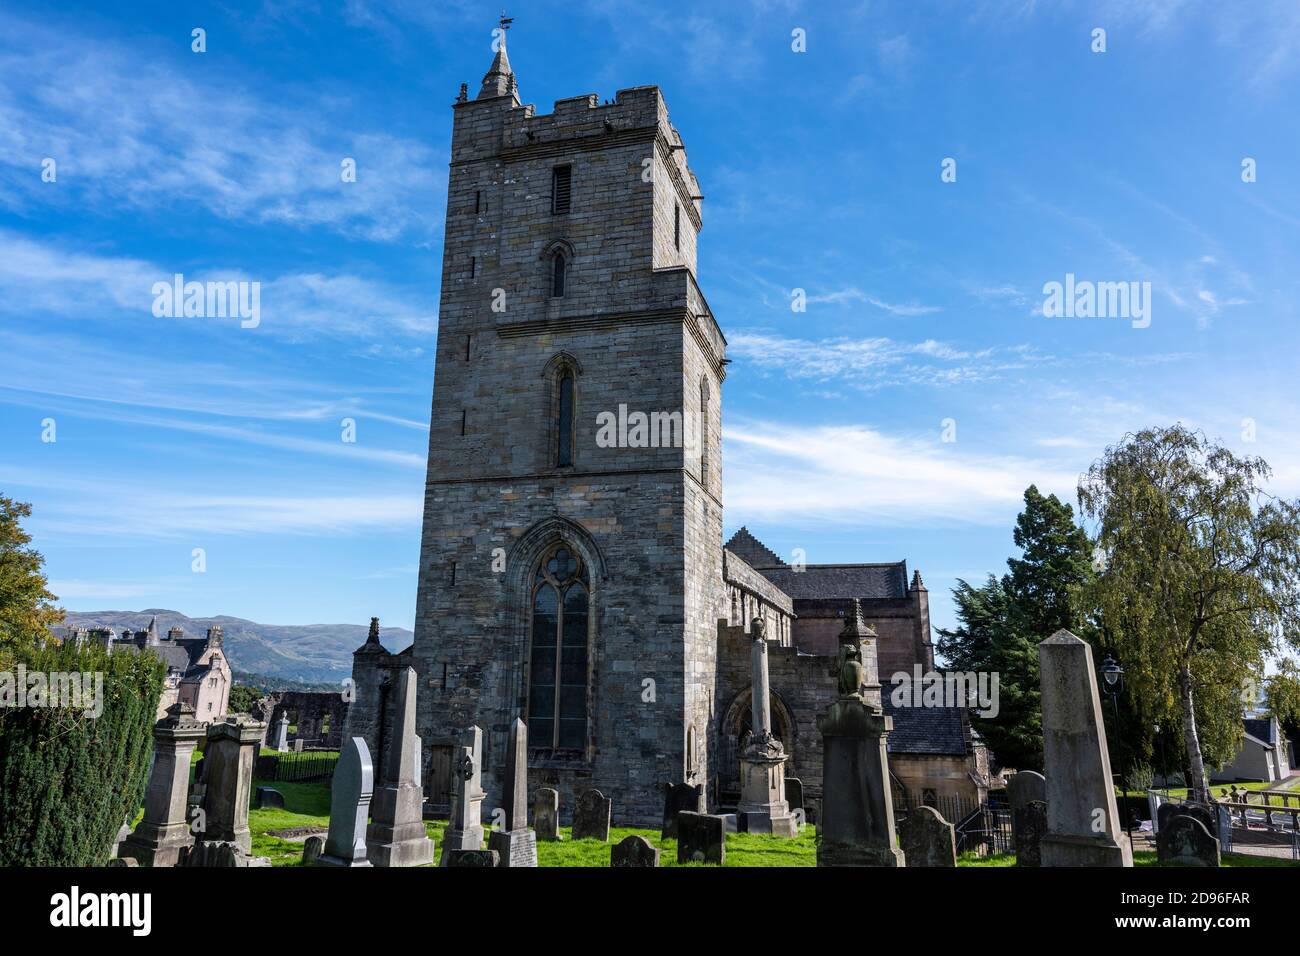 Church of the Holy Rude viewed from Old Town Cemetery in Stirling old town, Scotland, UK Stock Photo